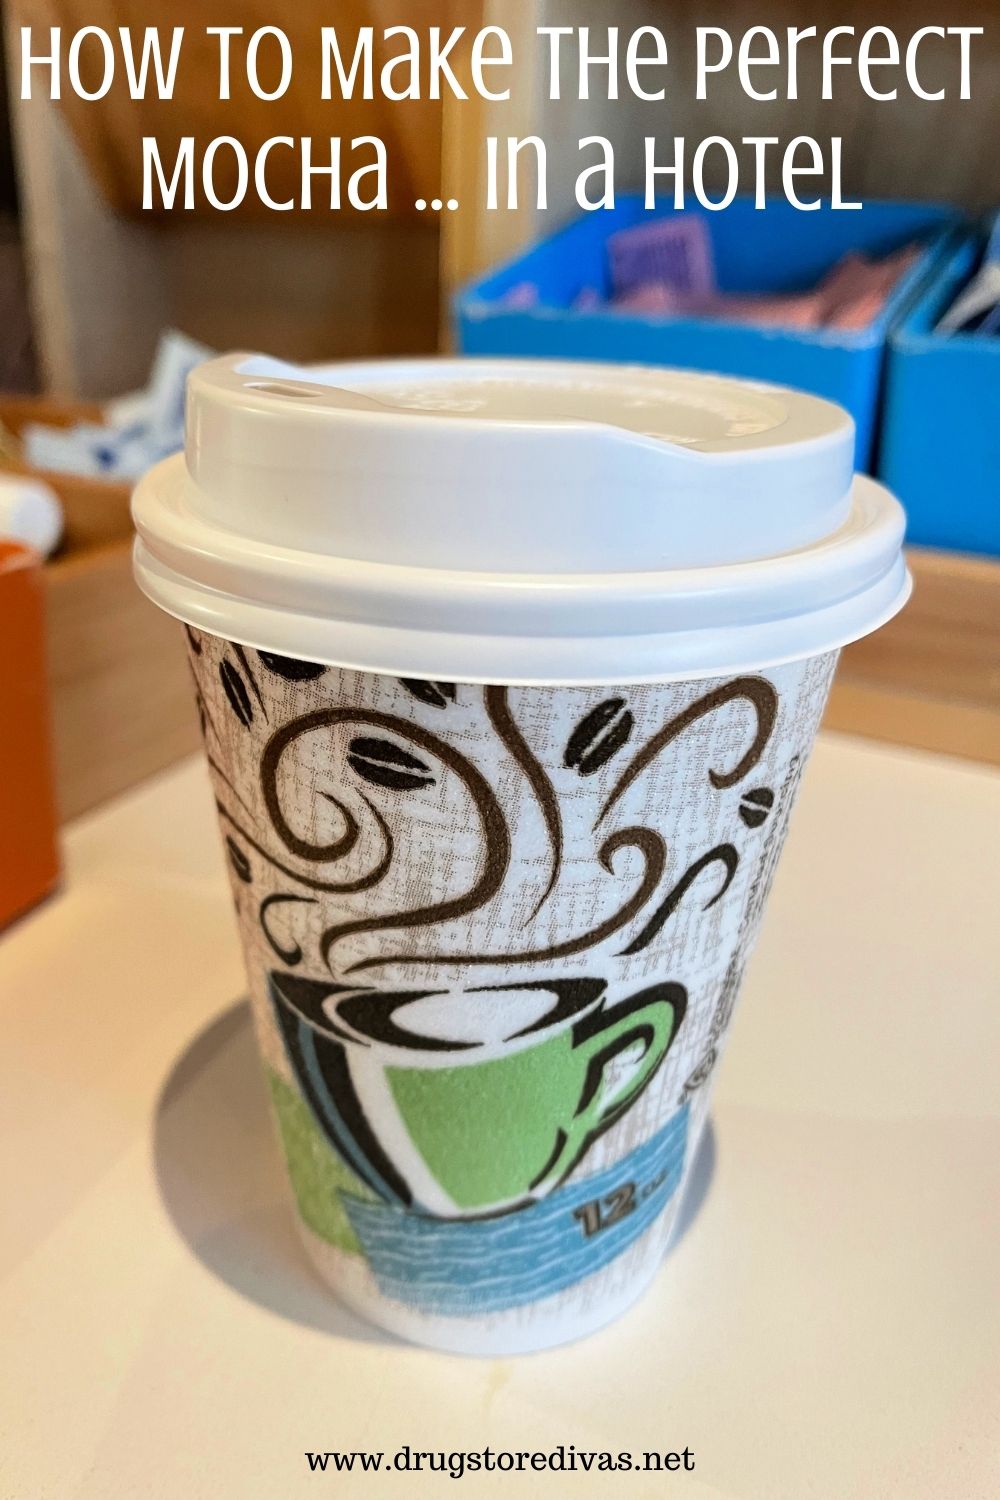 Hot coffee cup with a lid on at a coffee bar in a hotel.